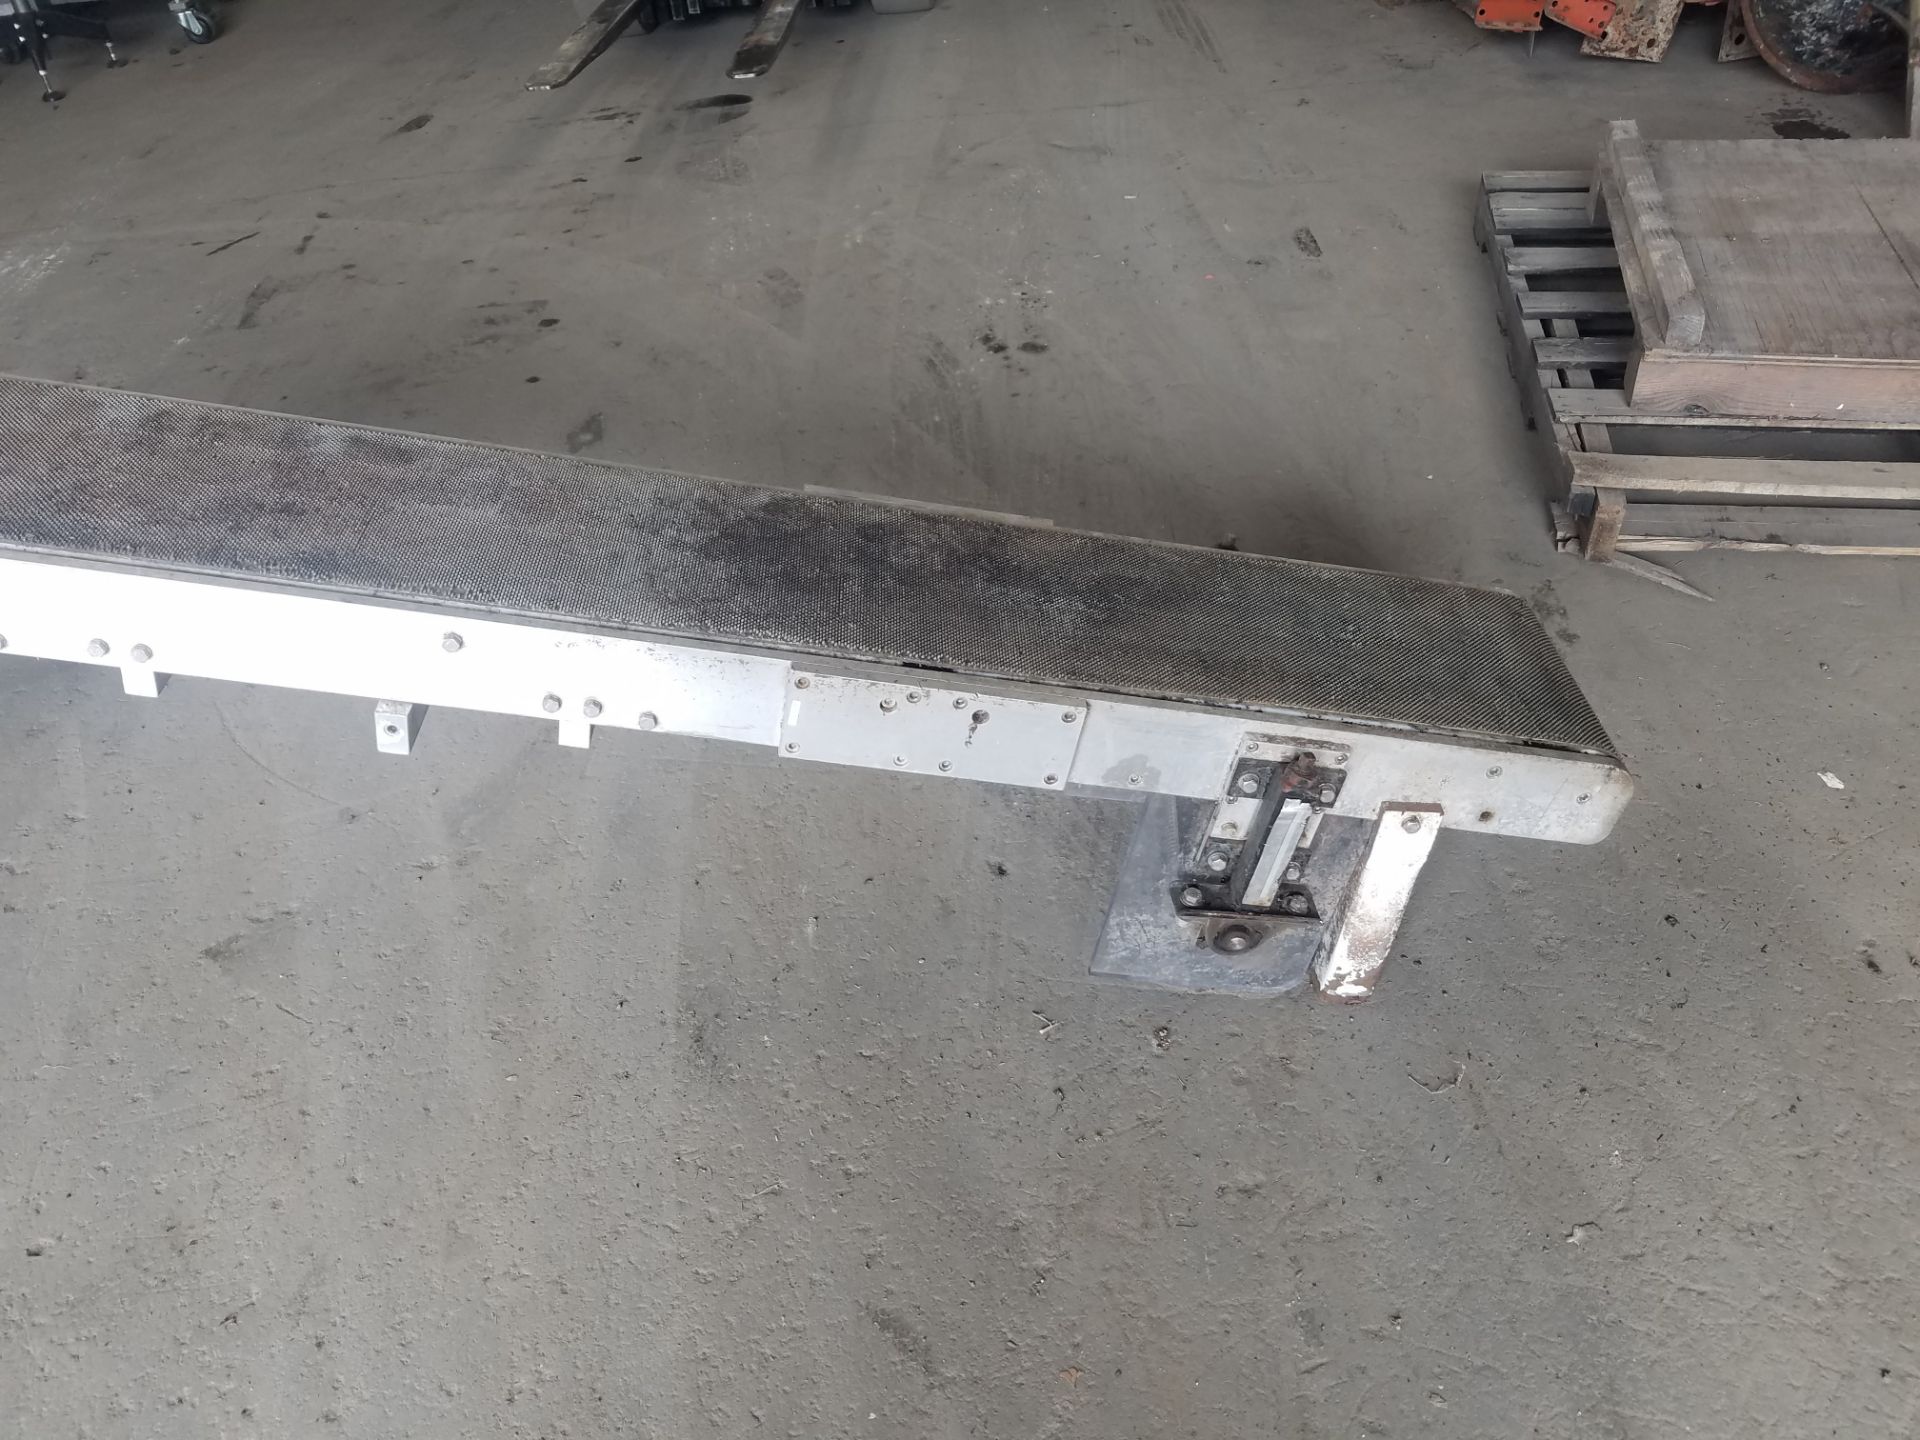 Aprox. 9-1/2" W x 84" Long Incline Belt Conveyor (Rigging, Loading & Site Management Fee $100.00 - Image 2 of 3